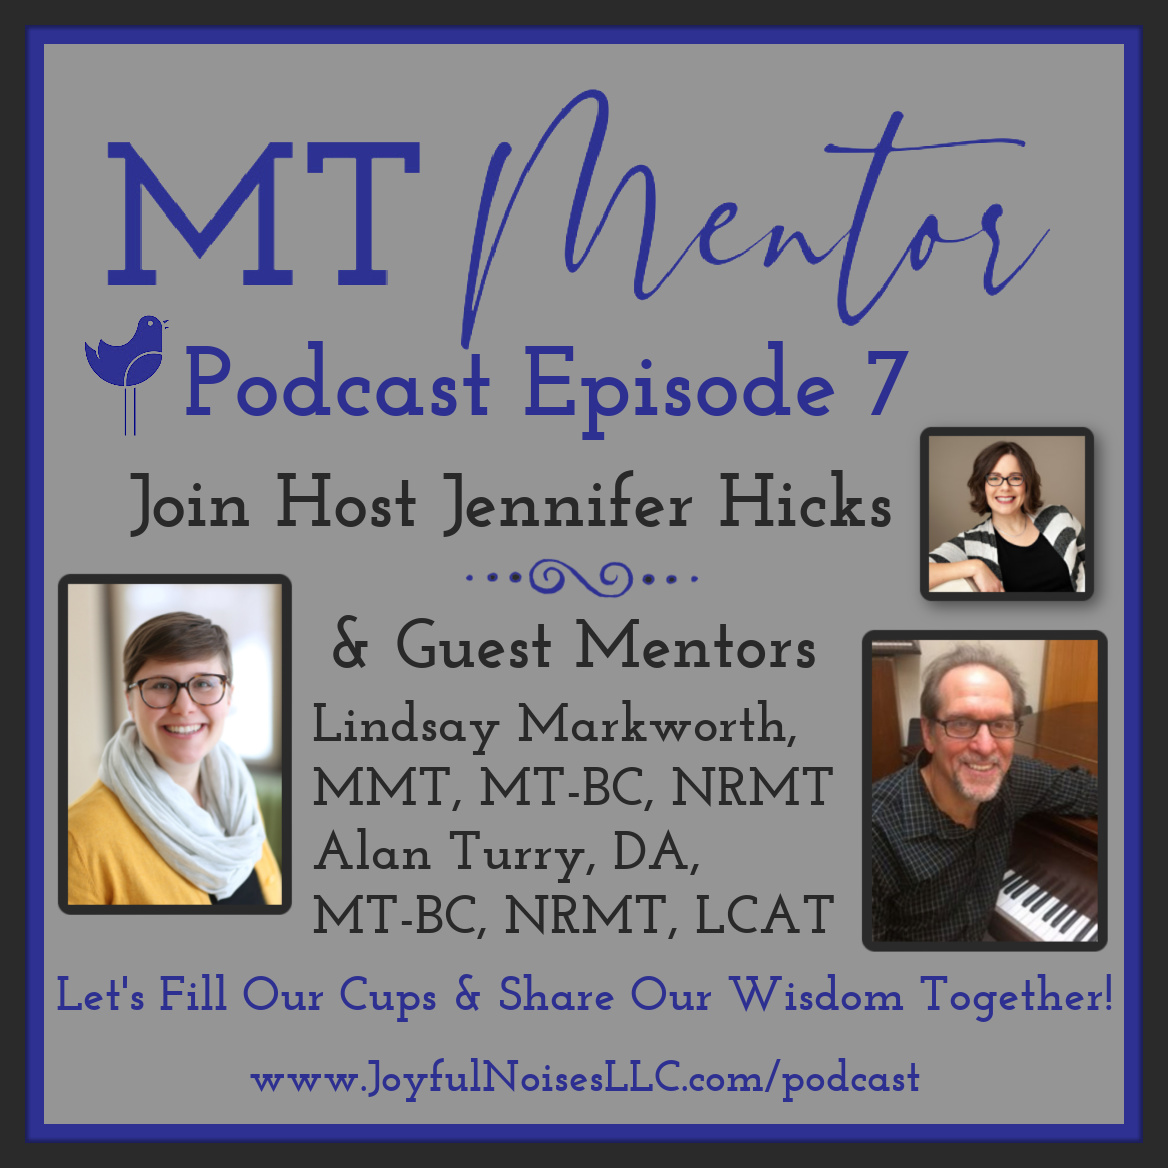 Headshots of host Jennifer Hicks and guest mentors Lindsay Markworth and Alan Turry with "MT Mentor Podcast Episode 7" in blue on a gray background